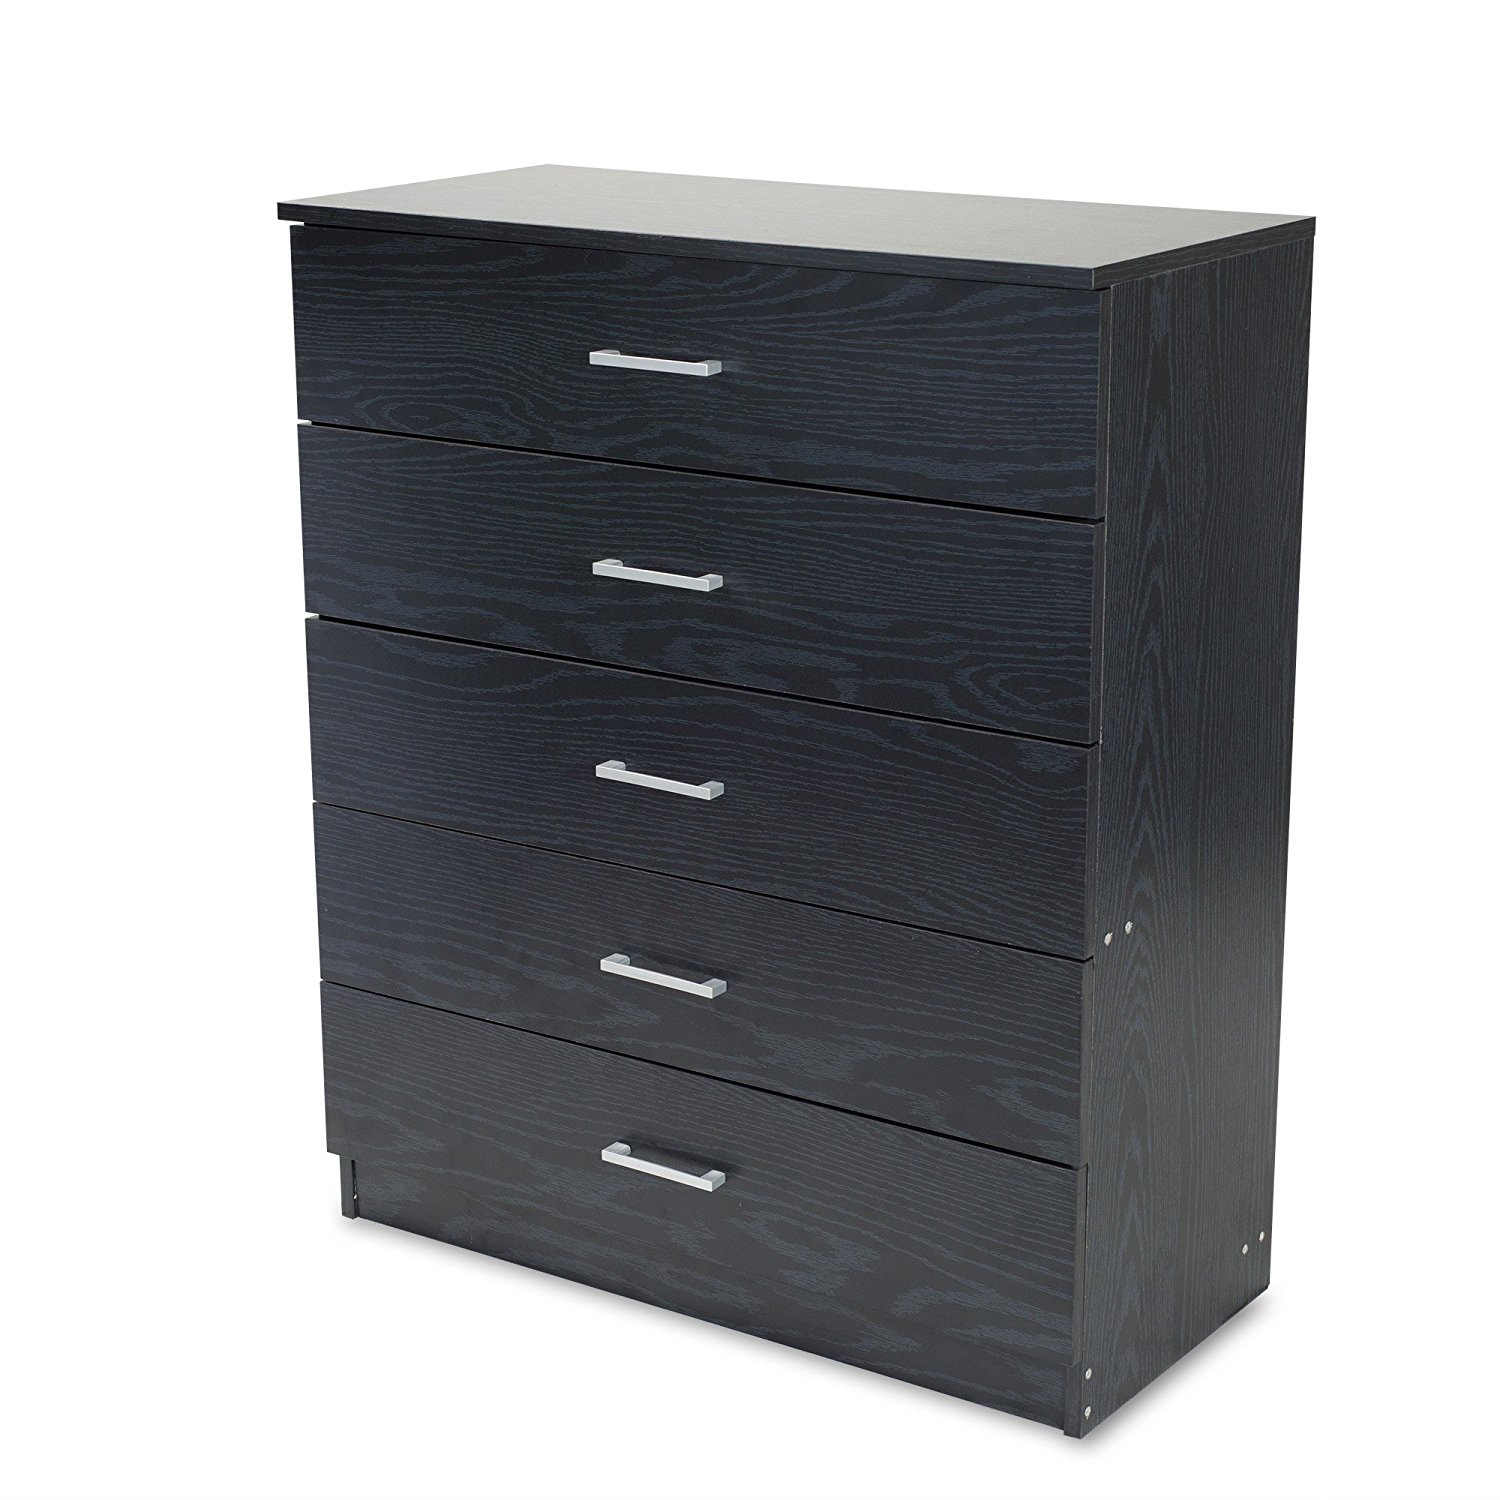 Black Chest of 5 Drawers - Home Treats UK